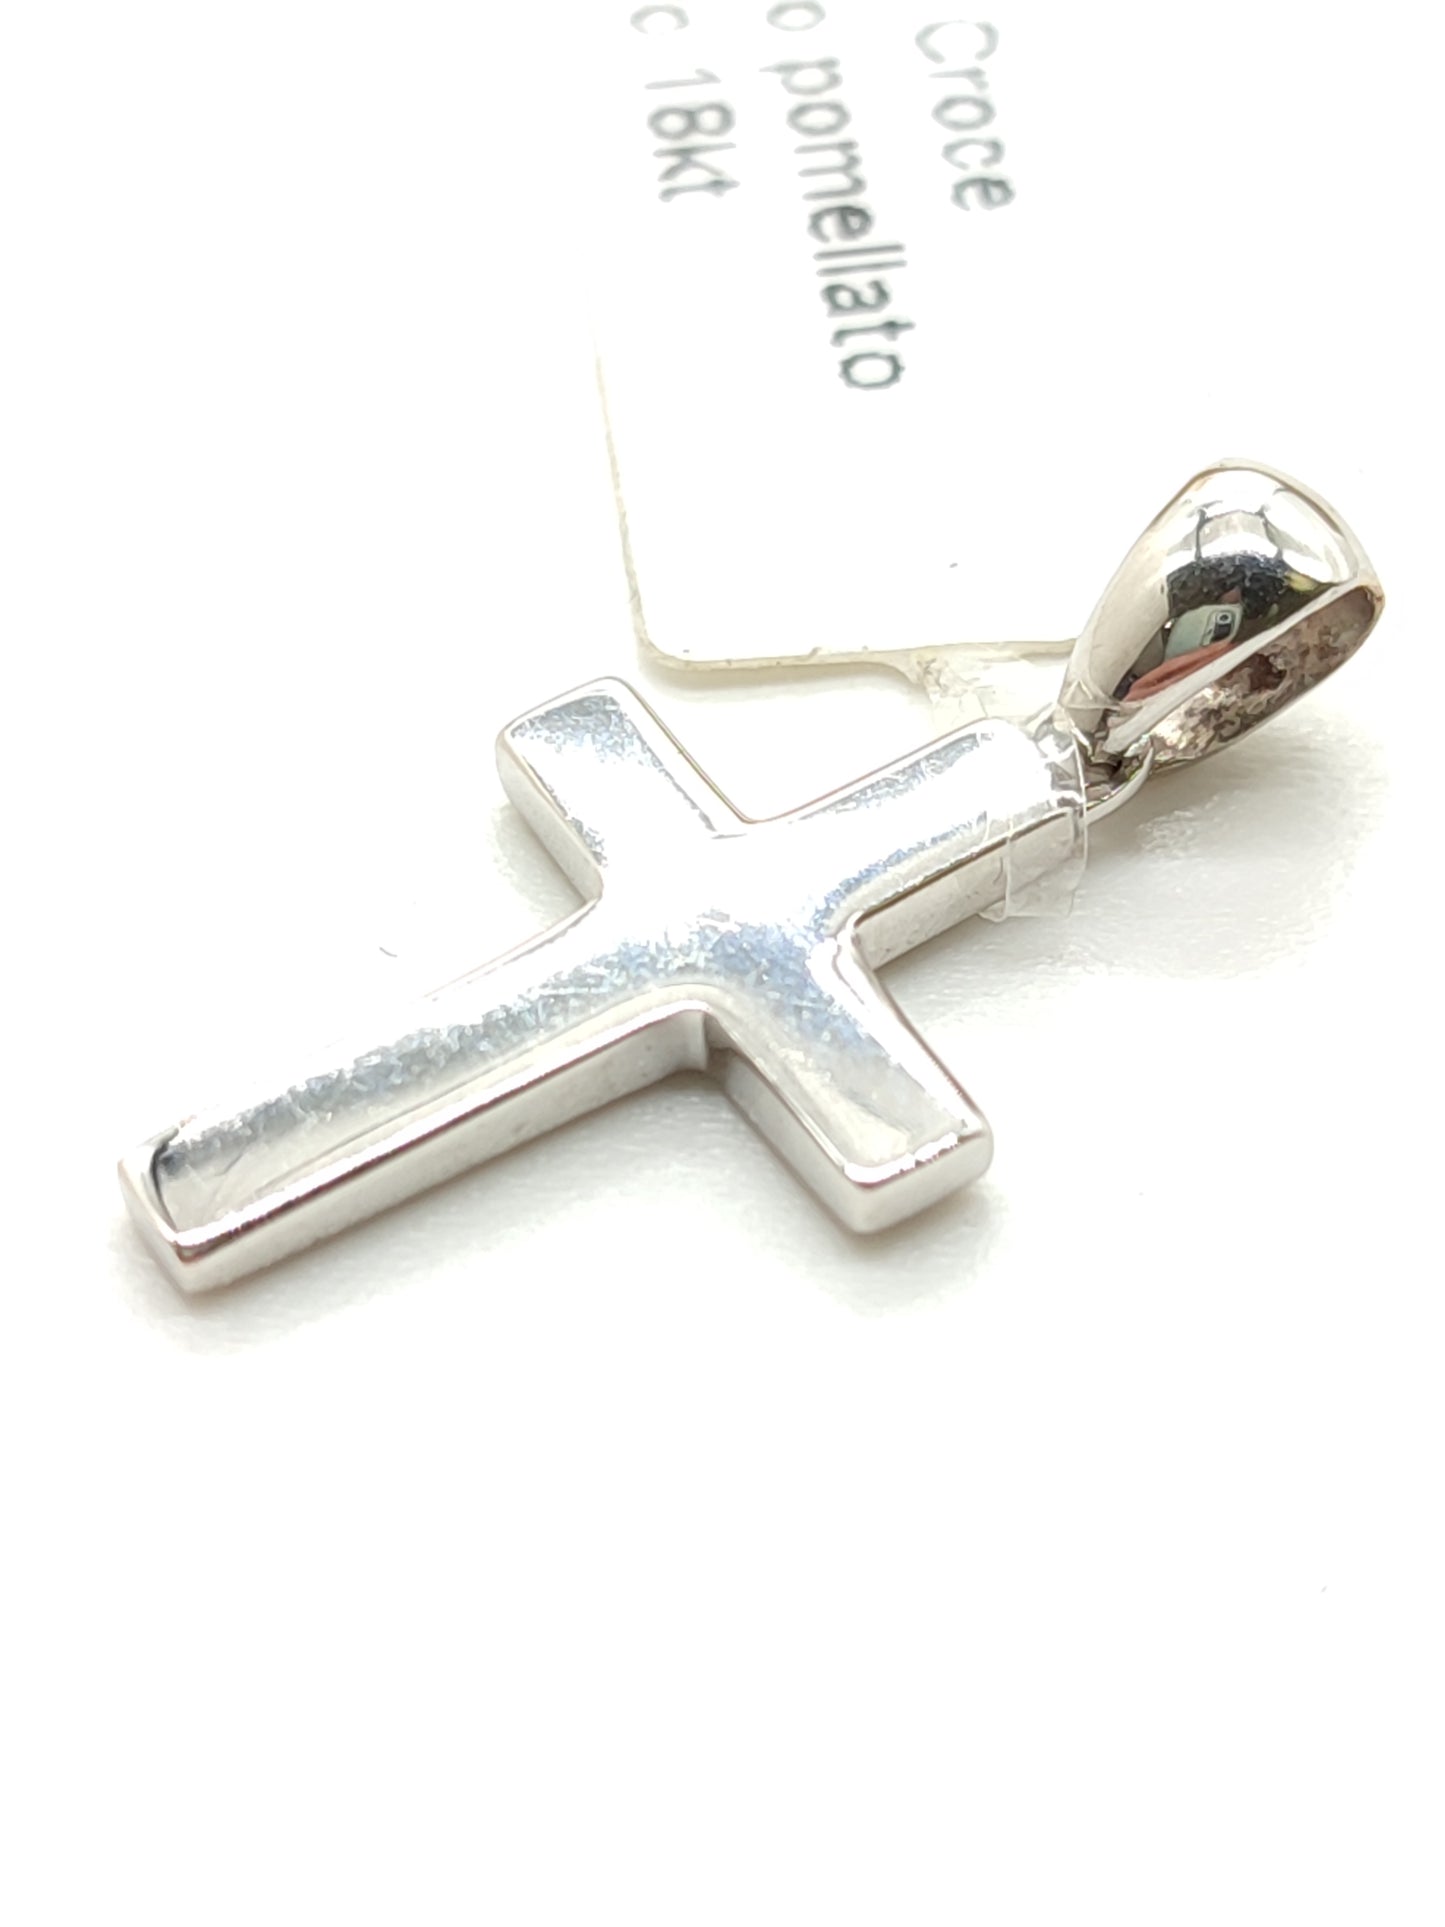 Solid cross pendant in white gold 2 x 1.5 cm